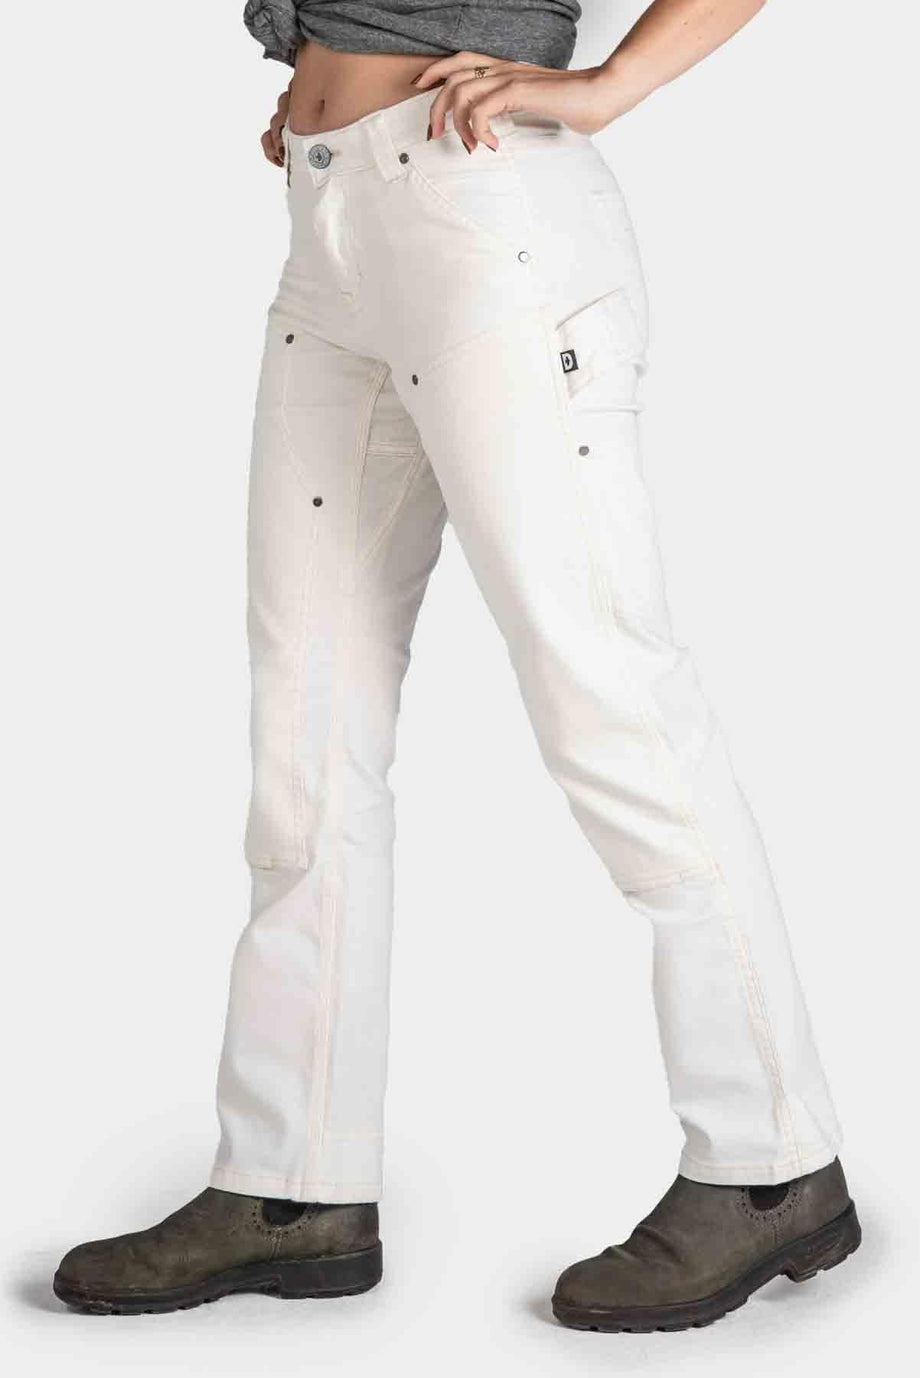 Safety Girl Womens Painters Pants